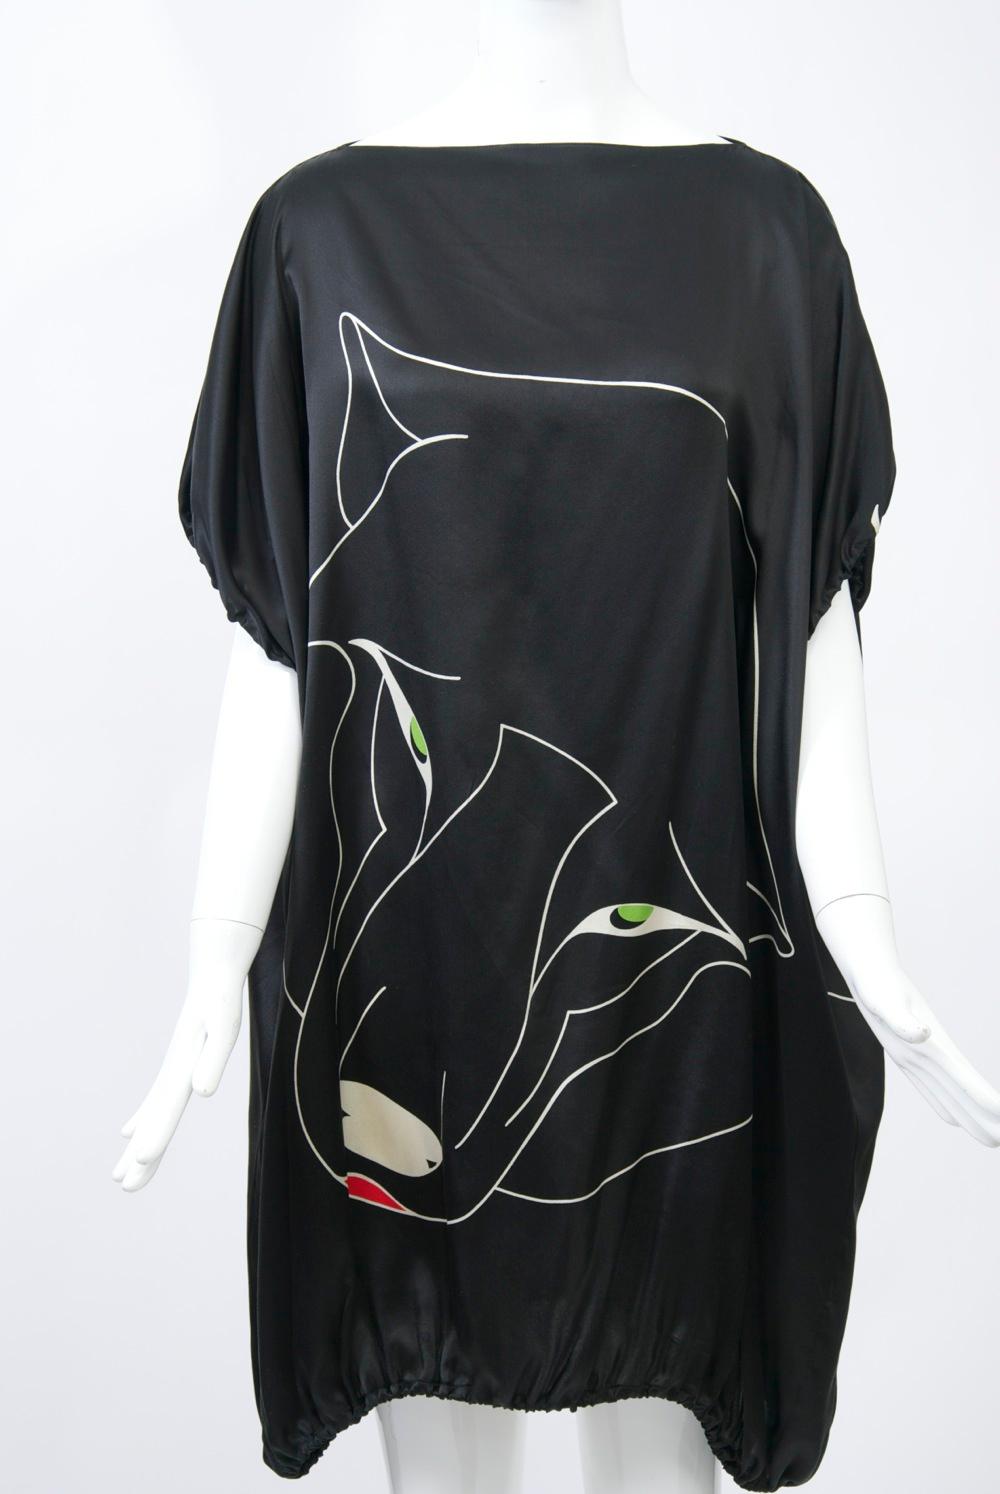 Krizia black silk tunic printed with large white outline of a big cat, accented with green eyes and a red mouth. Straight, loose cut with dolman, short sleeves elasticized at hem, as is tunic. Keyhole opening in back. Free size.